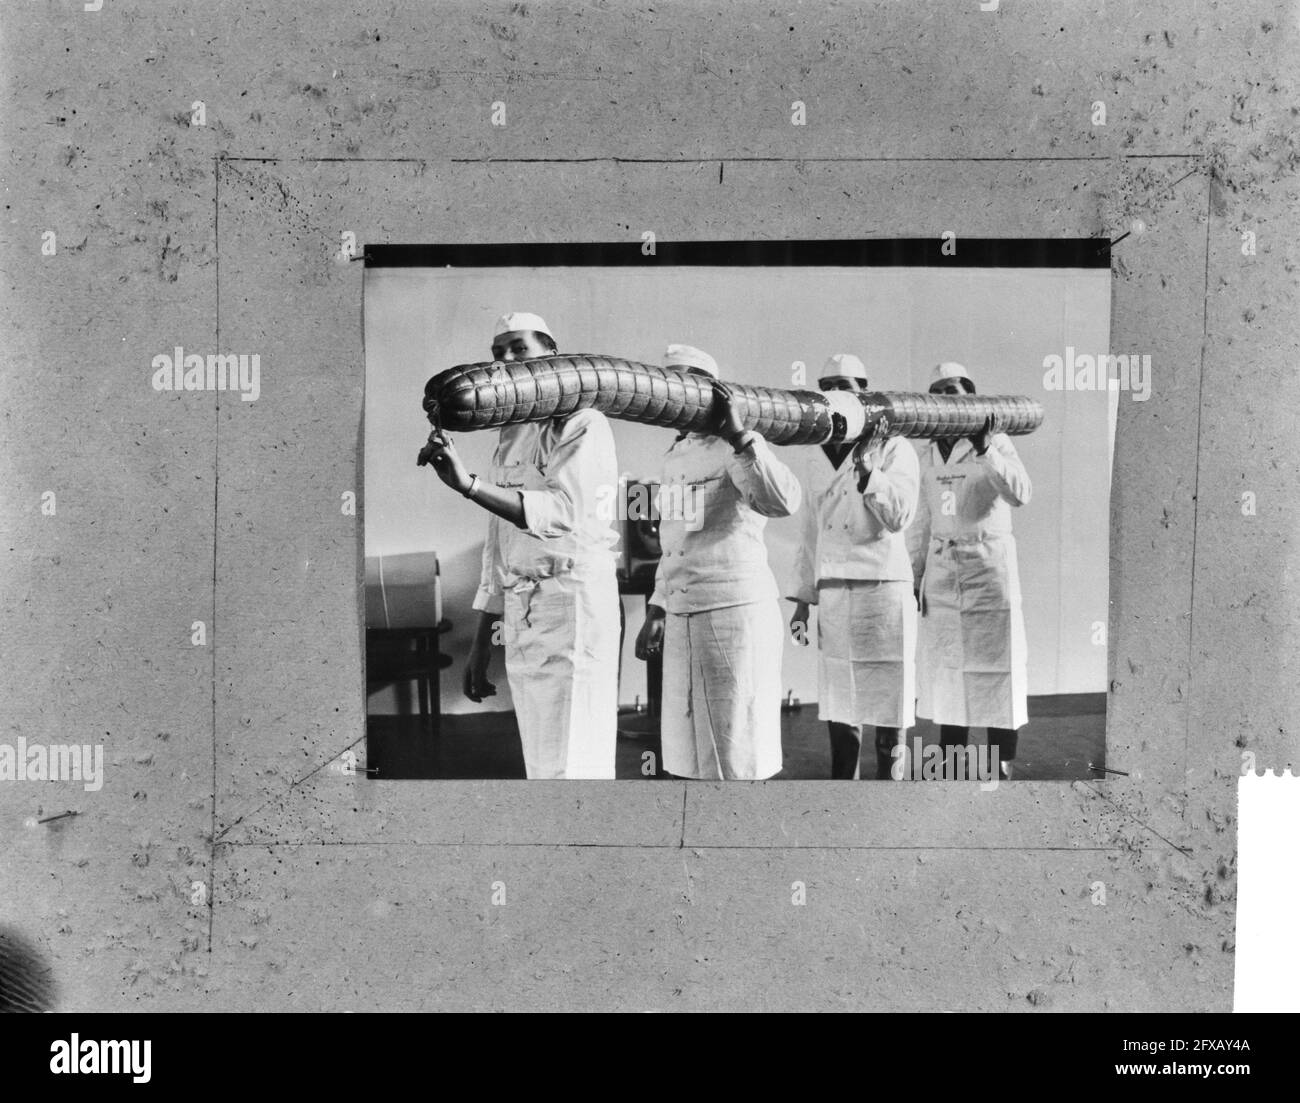 A sausage 4 feet long, April 6, 1964, sausages, The Netherlands, 20th century press agency photo, news to remember, documentary, historic photography 1945-1990, visual stories, human history of the Twentieth Century, capturing moments in time Stock Photo